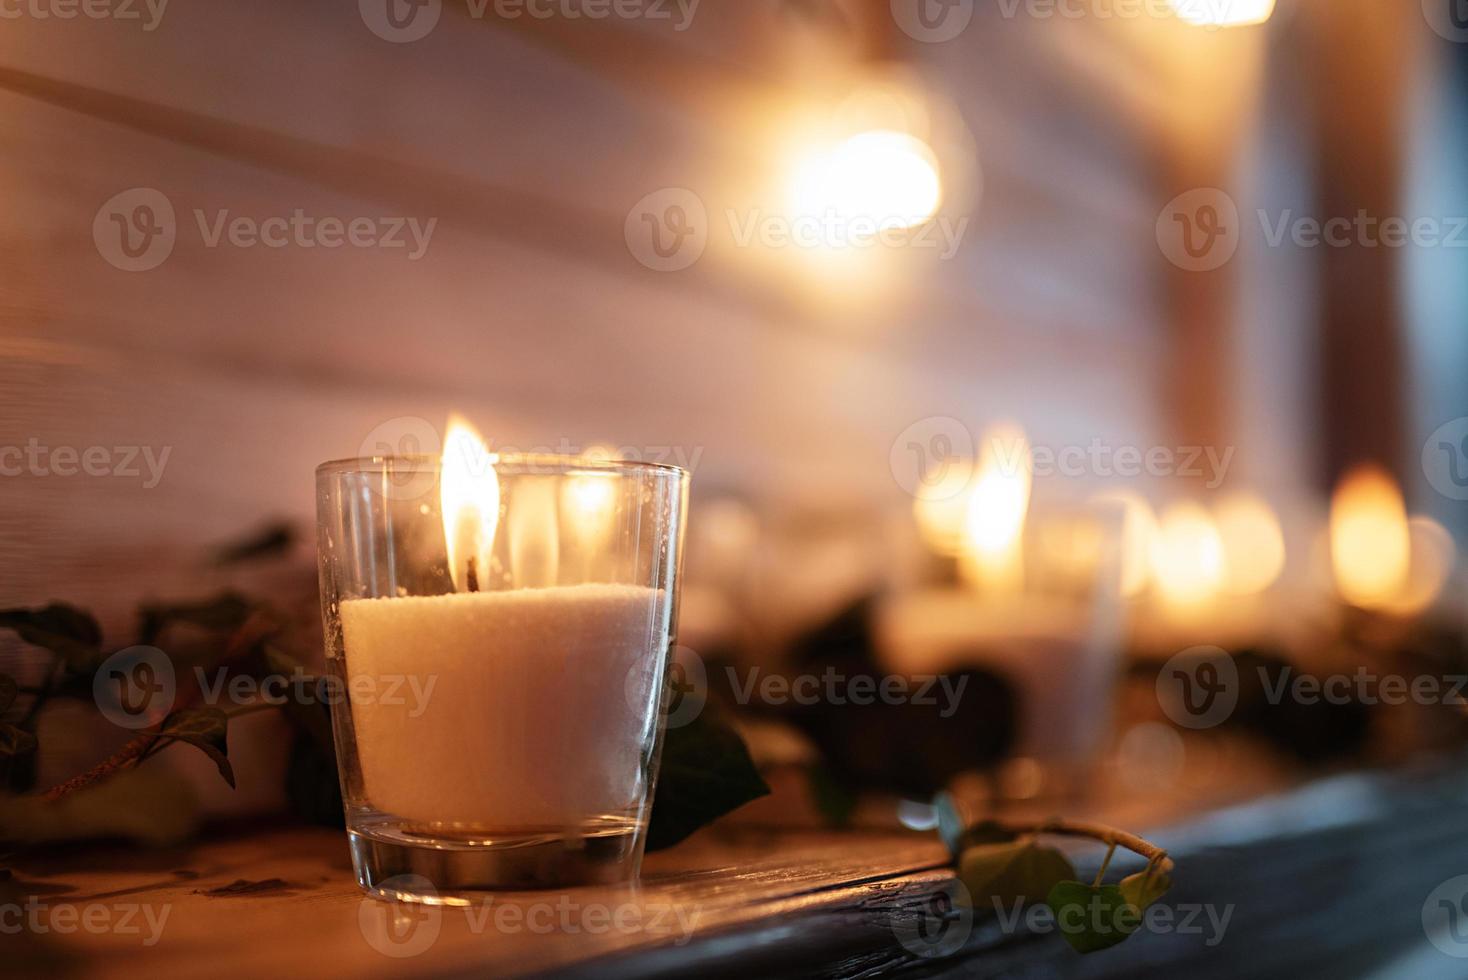 atmospheric candle decor with live fire on the banquet photo